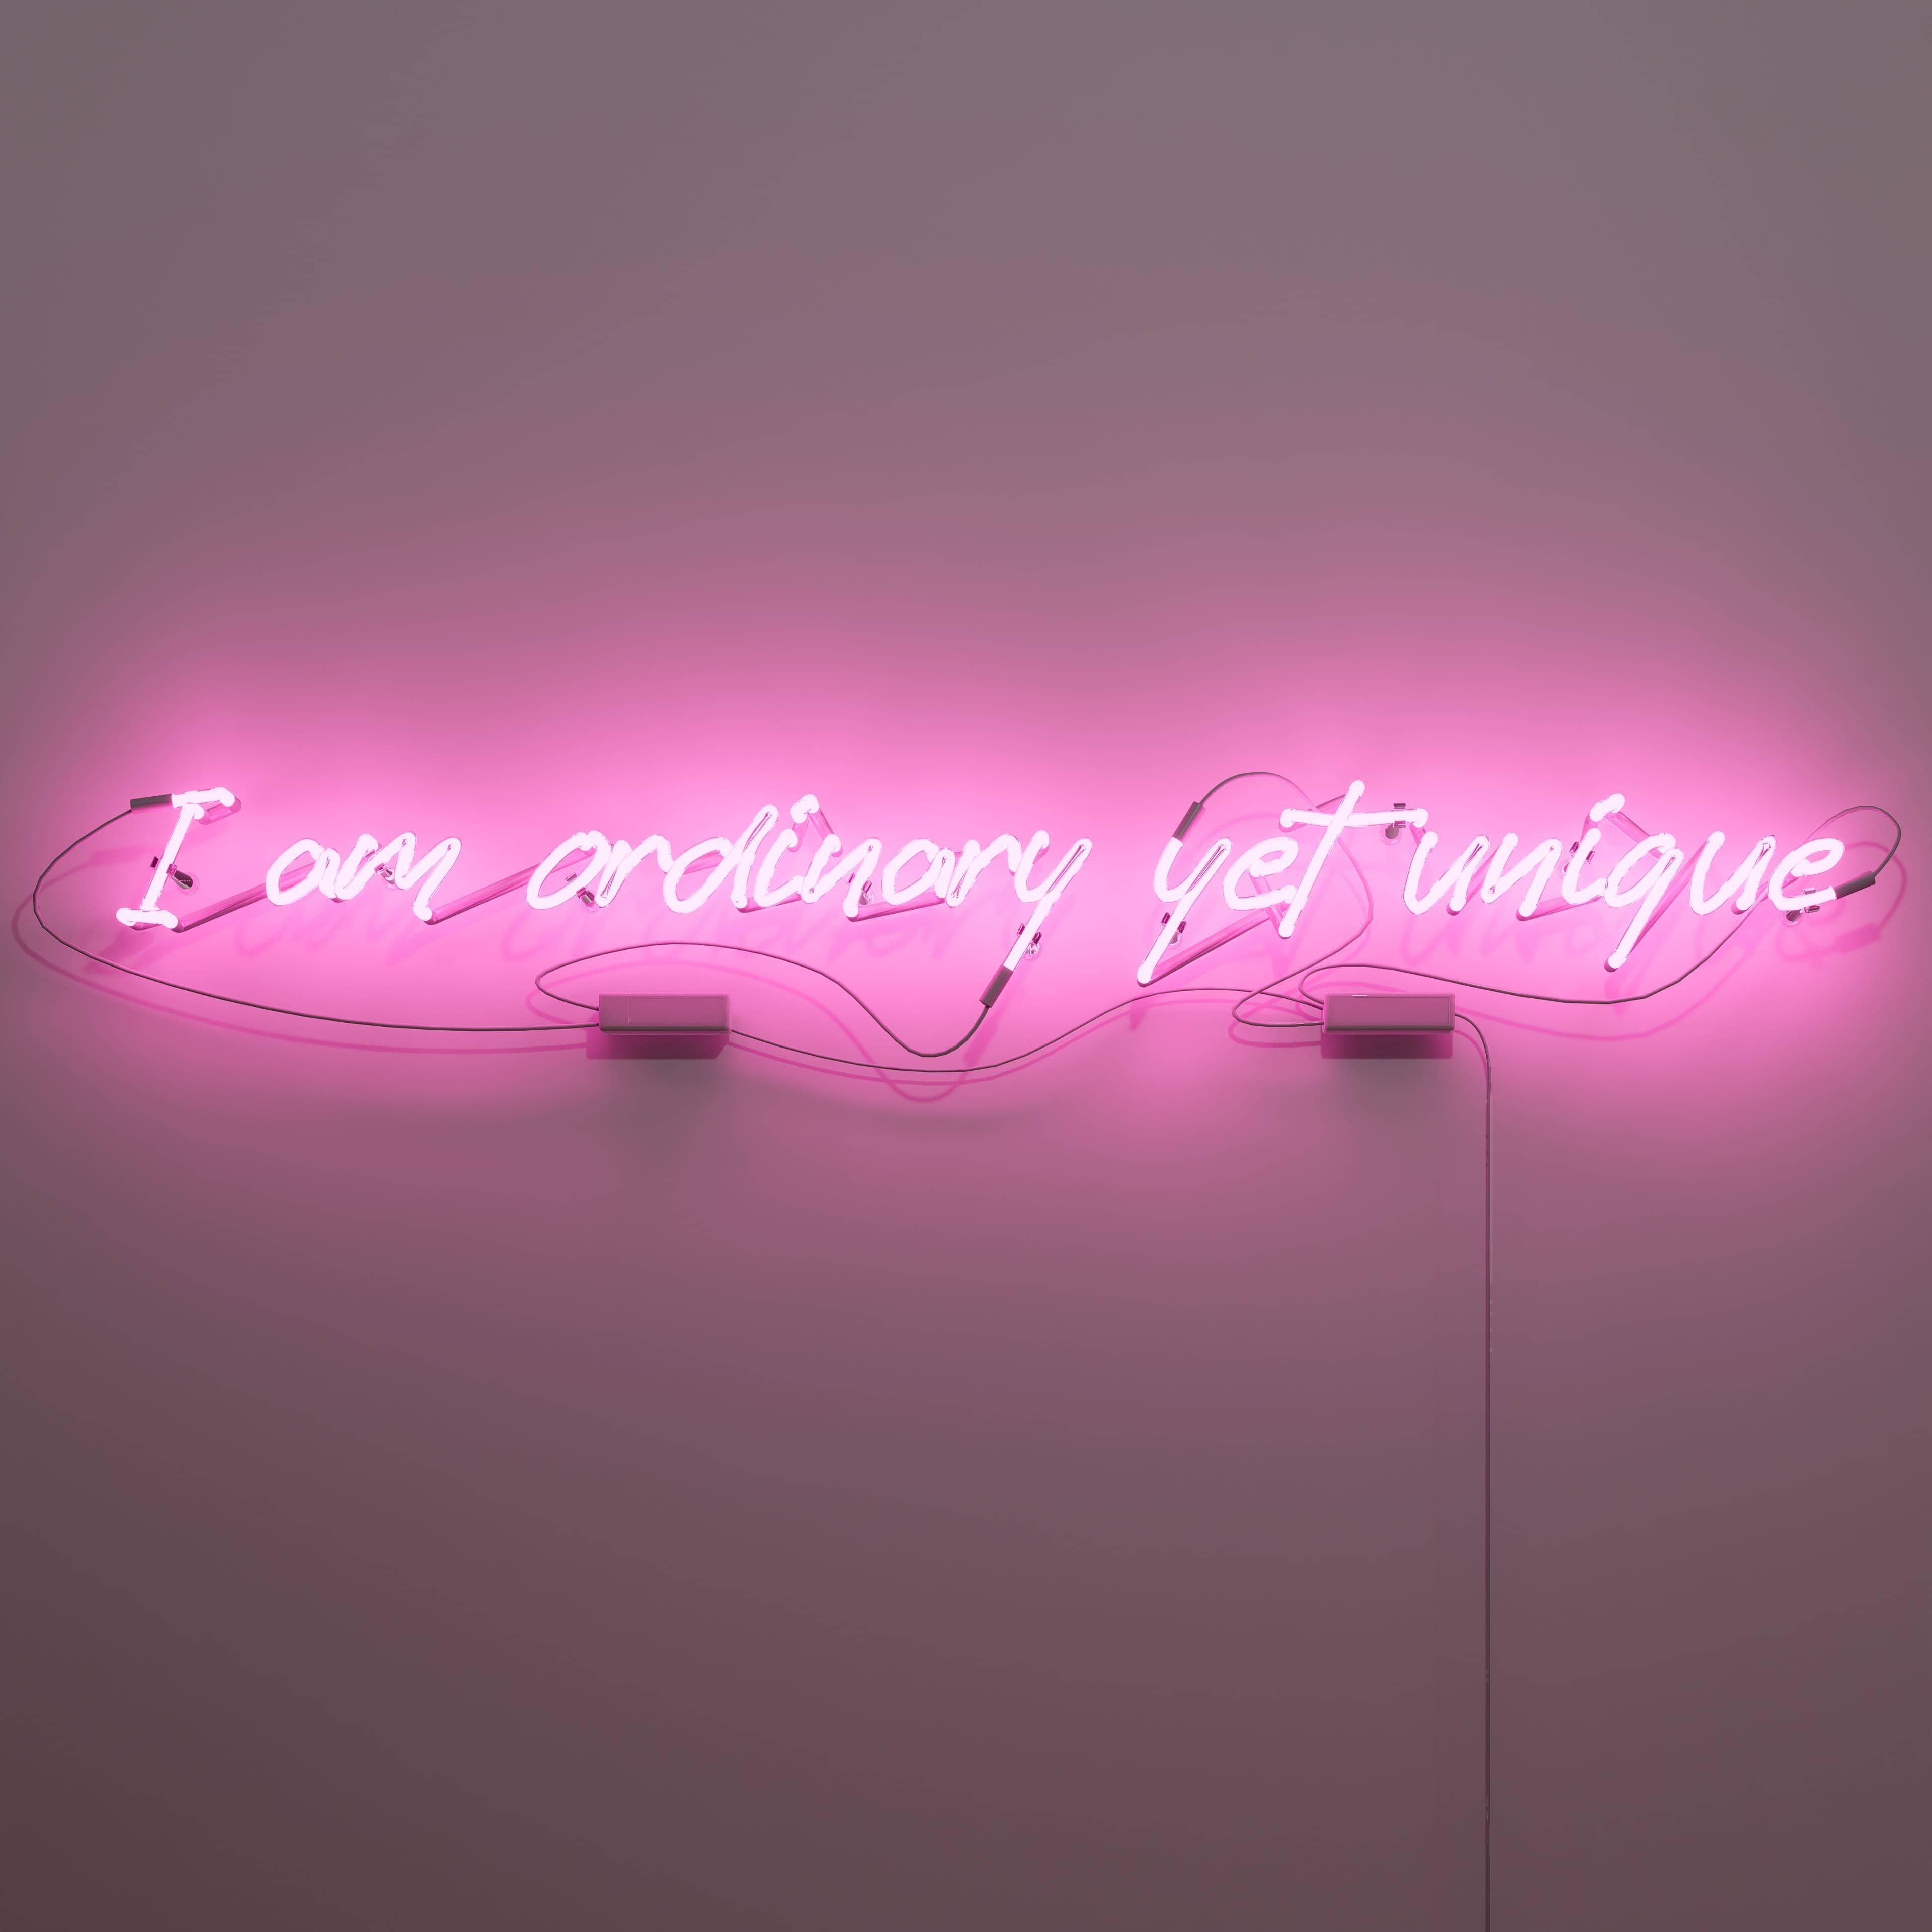 vintage-neon-signs-celebrate-individuality